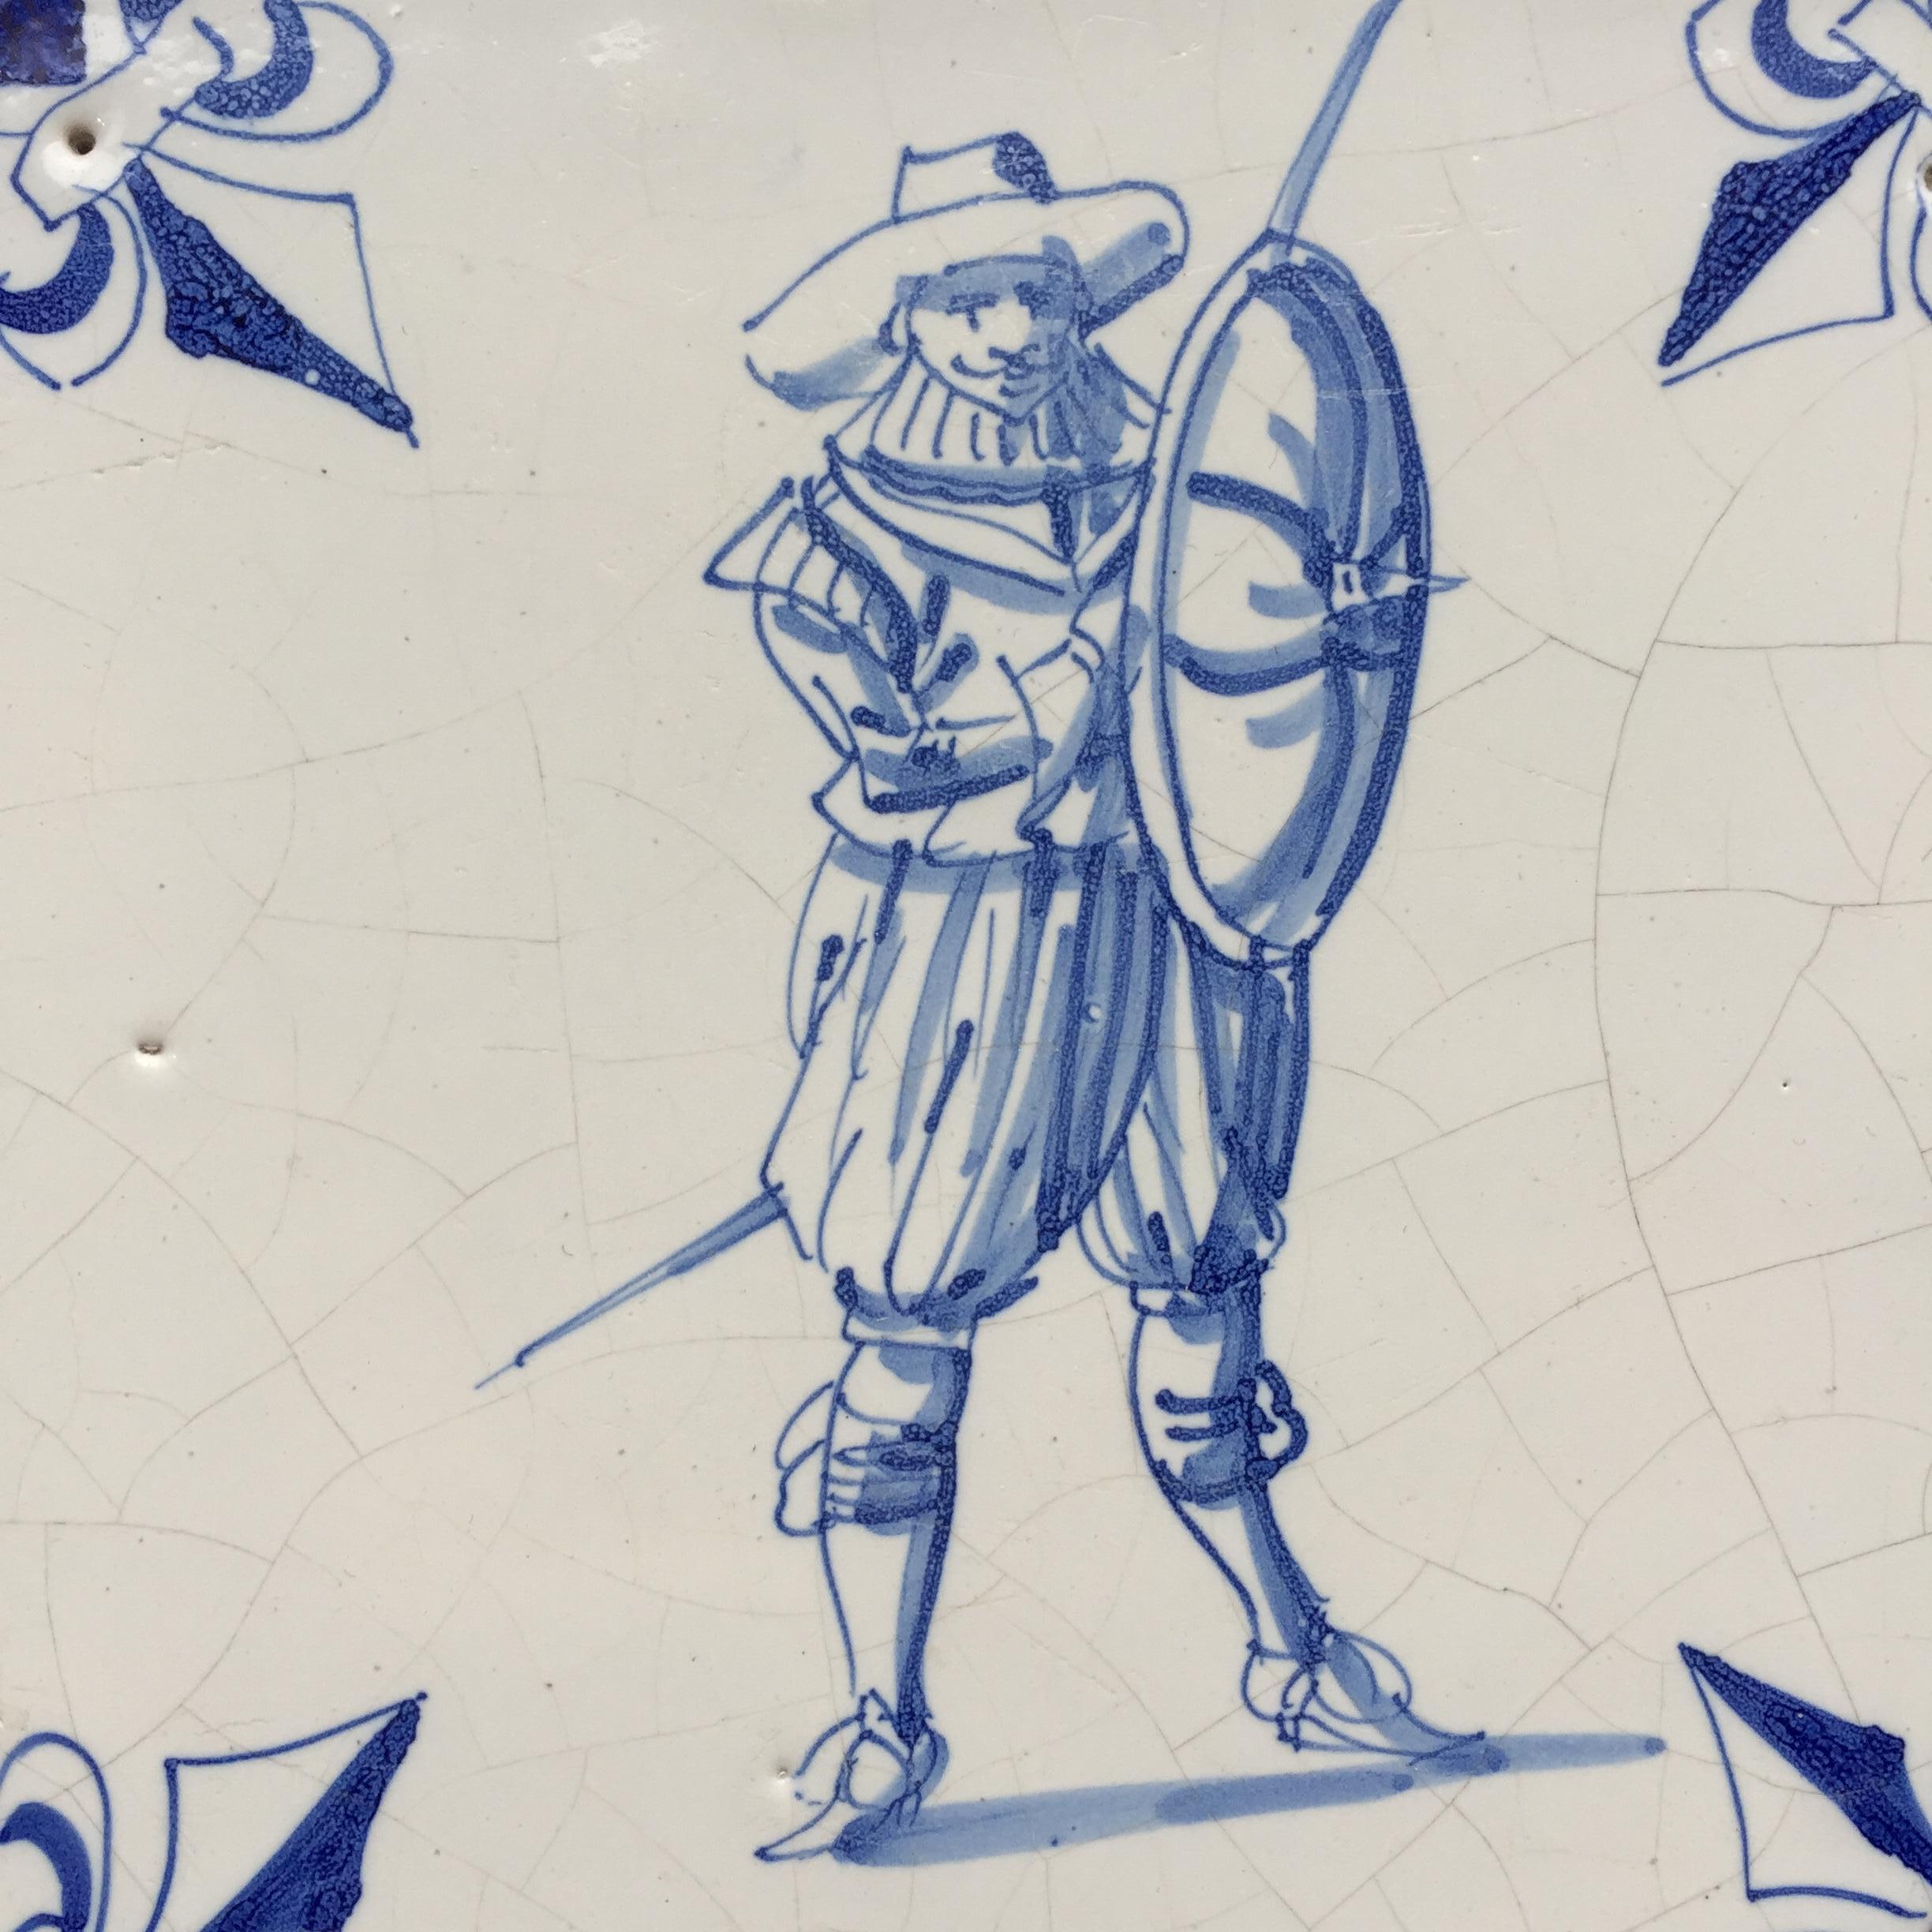 The Netherlands
Amsterdam
Circa 1625 – 1650

A blue and white Dutch tile with a decoration of a Dutch soldier from the period of the 80 Years War.
The decoration of this tile is very detailed and we can beautifully see the details in his clothing,